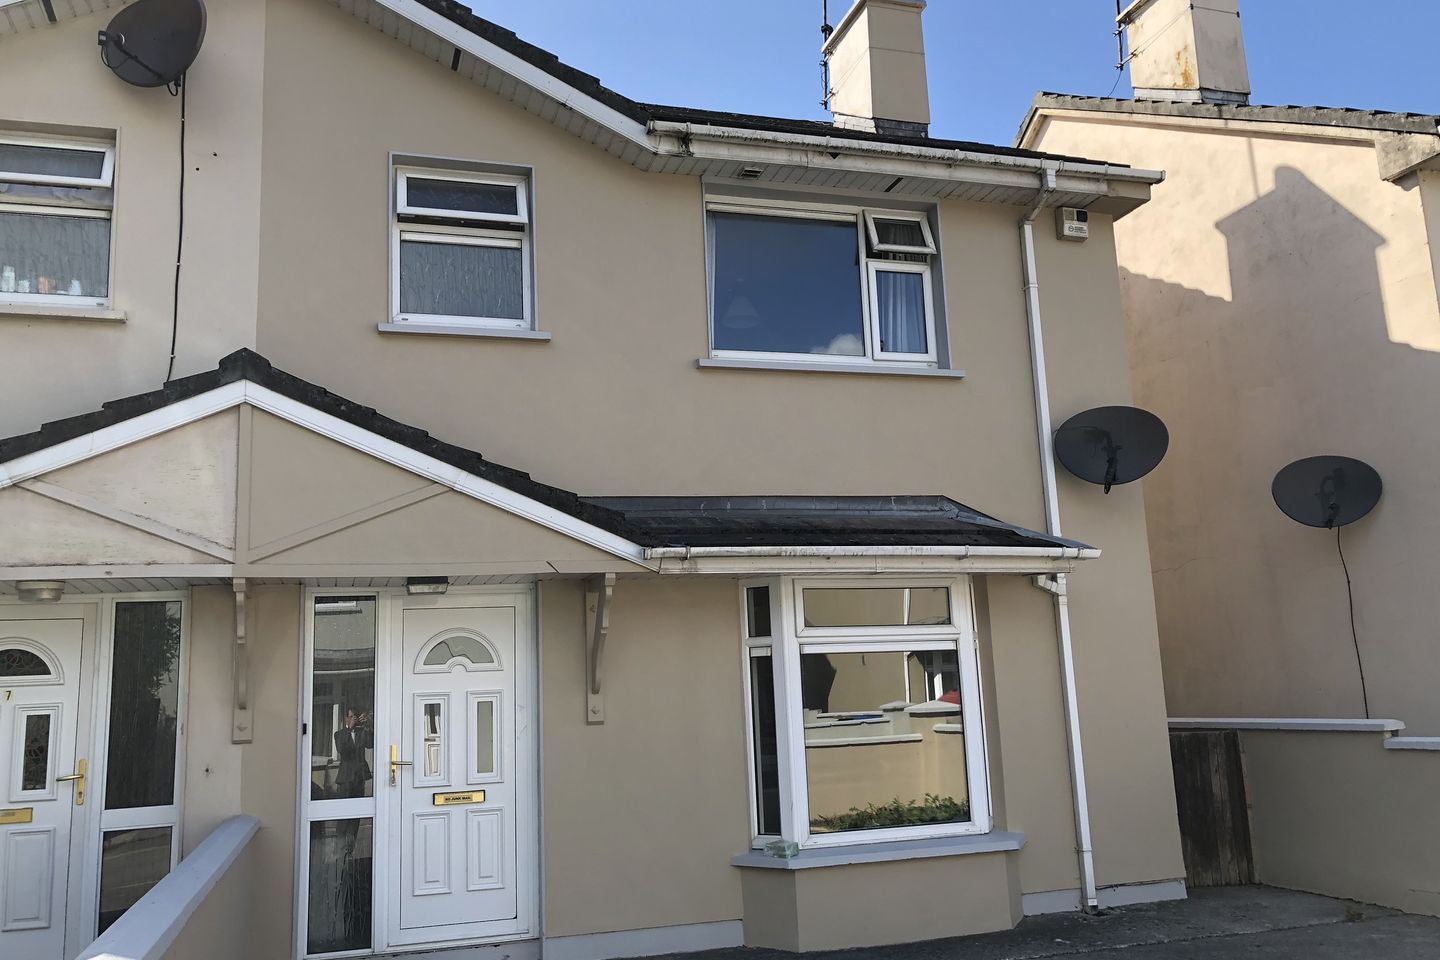 8 Abbey Park, North Circular Road, Tralee, Co. Kerry, V92TPR4